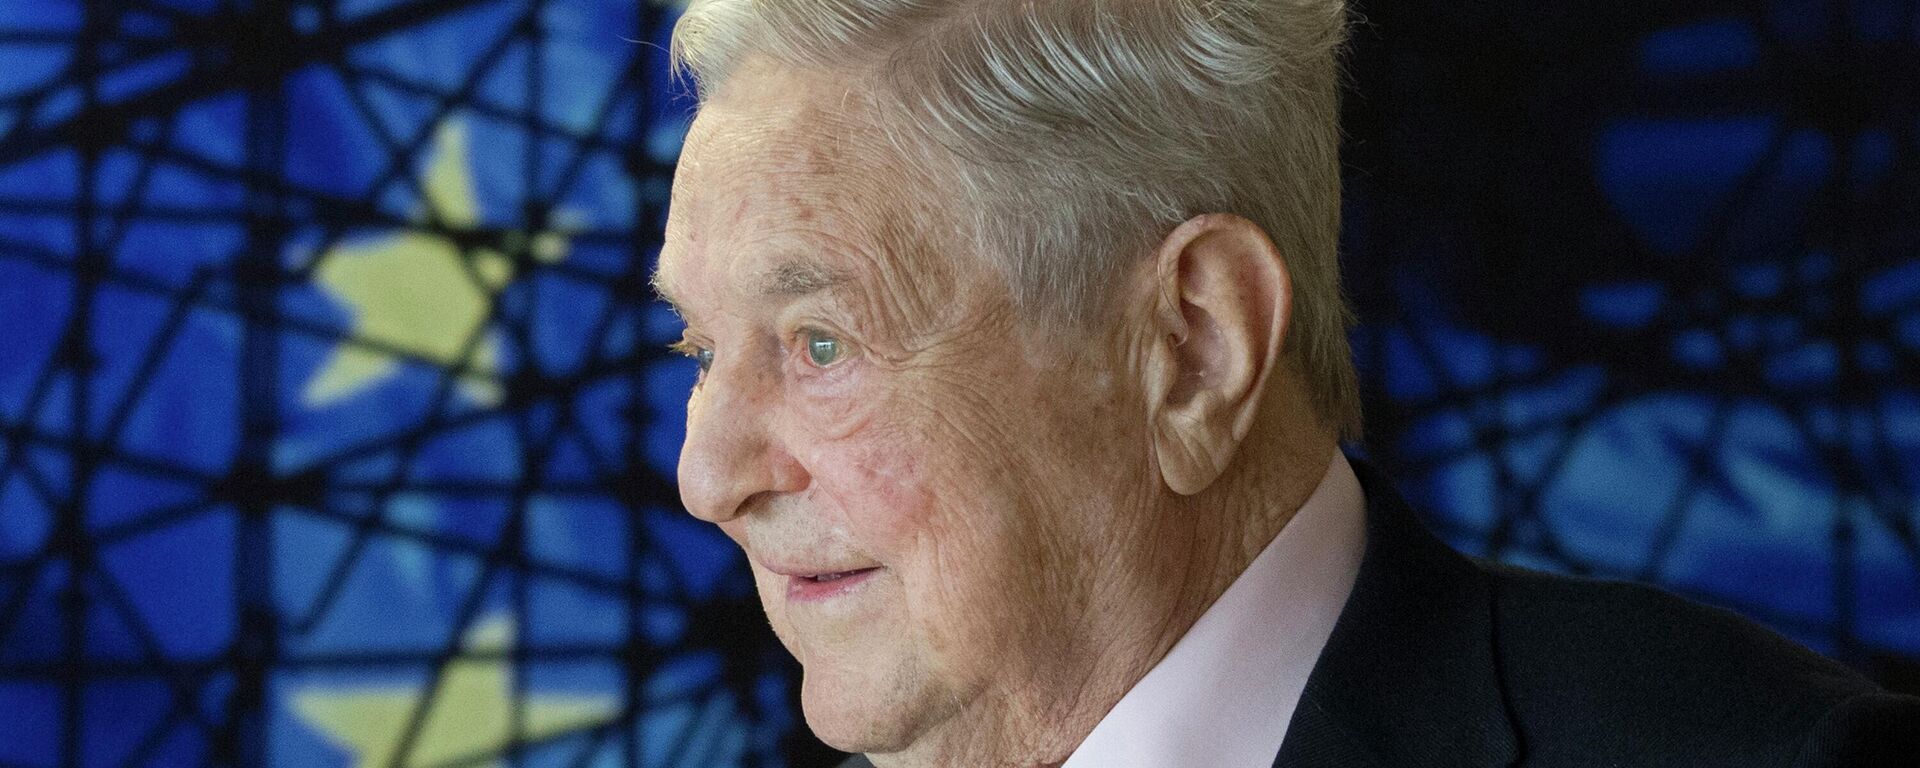 In this Thursday, April 27, 2017 file photom, George Soros, Founder and Chairman of the Open Society Foundation, waits for the start of a meeting at EU headquarters in Brussels. - Sputnik International, 1920, 06.10.2022